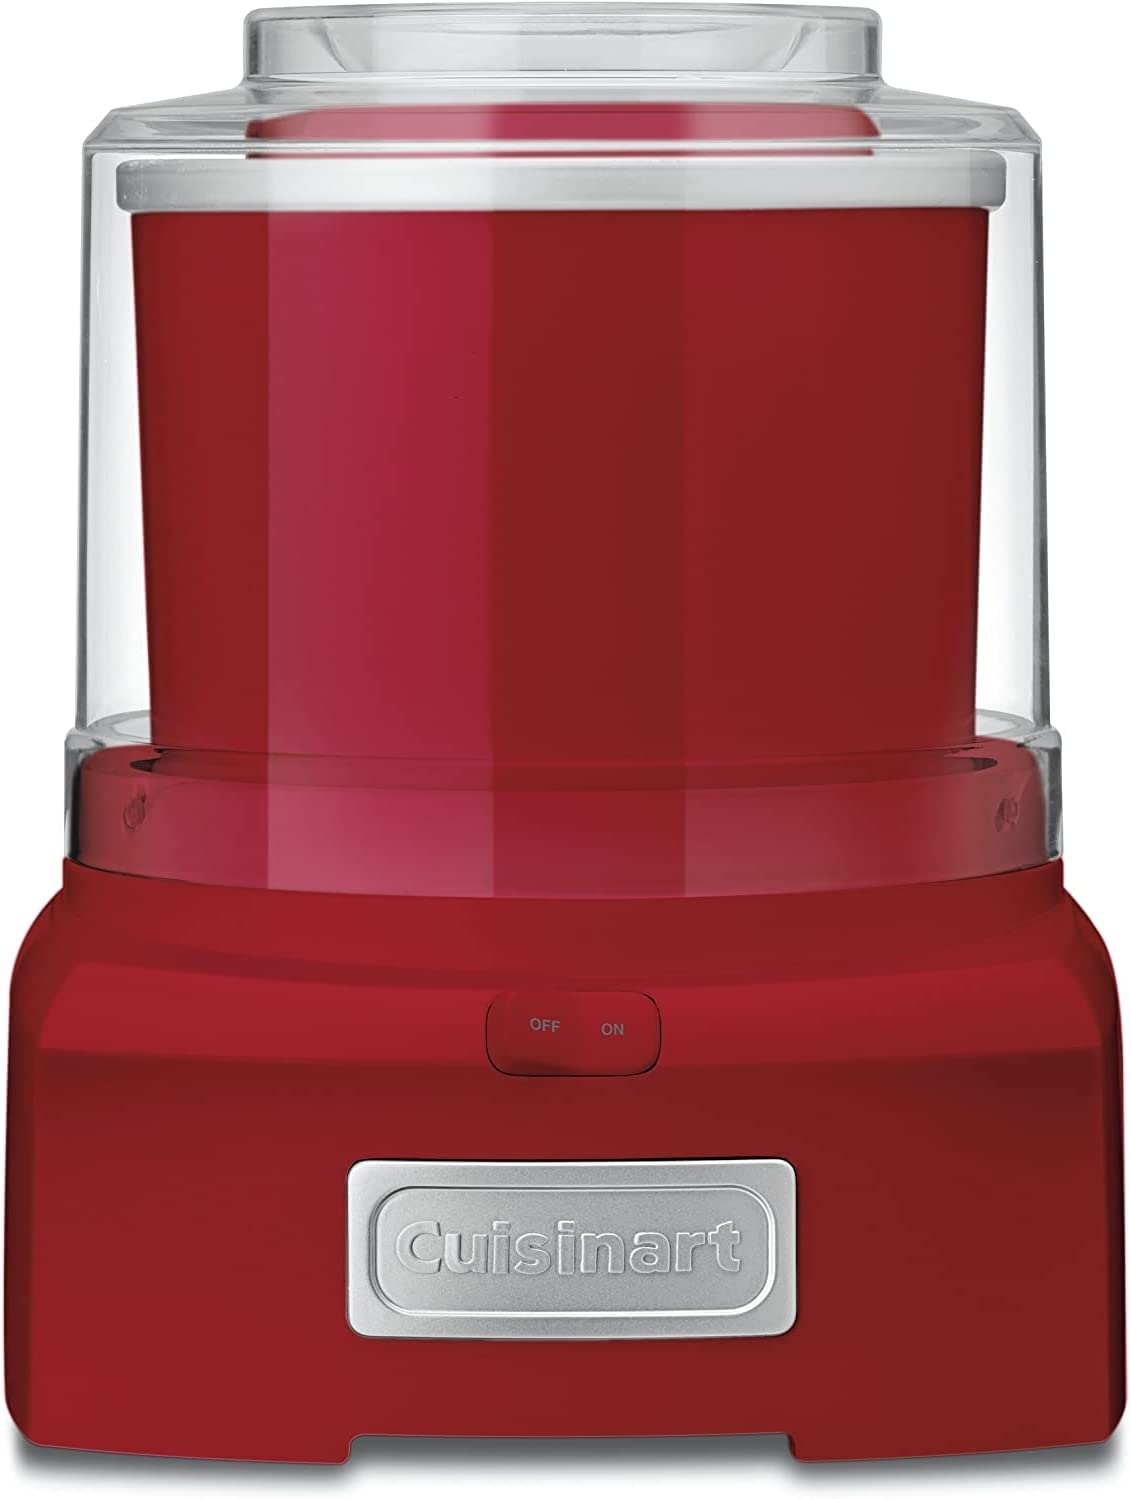 Cuisinart ICE-20P1 Automatic 1.5-Quart Frozen Yogurt, Ice Cream and Sorbet Maker, Makes Frozen Treats in less than 20-Minutes,